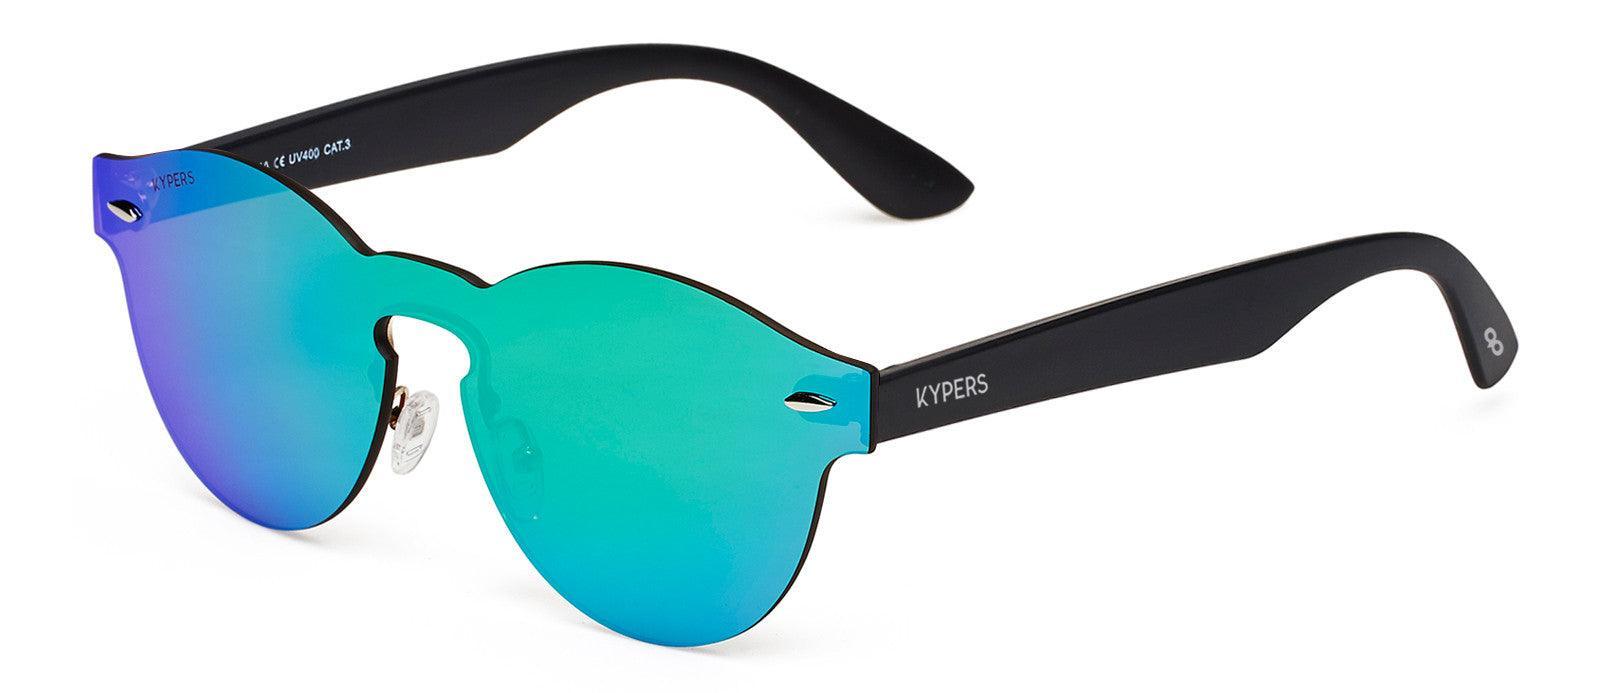 KYPERS sunglasses model LUA  with  frame and  lens